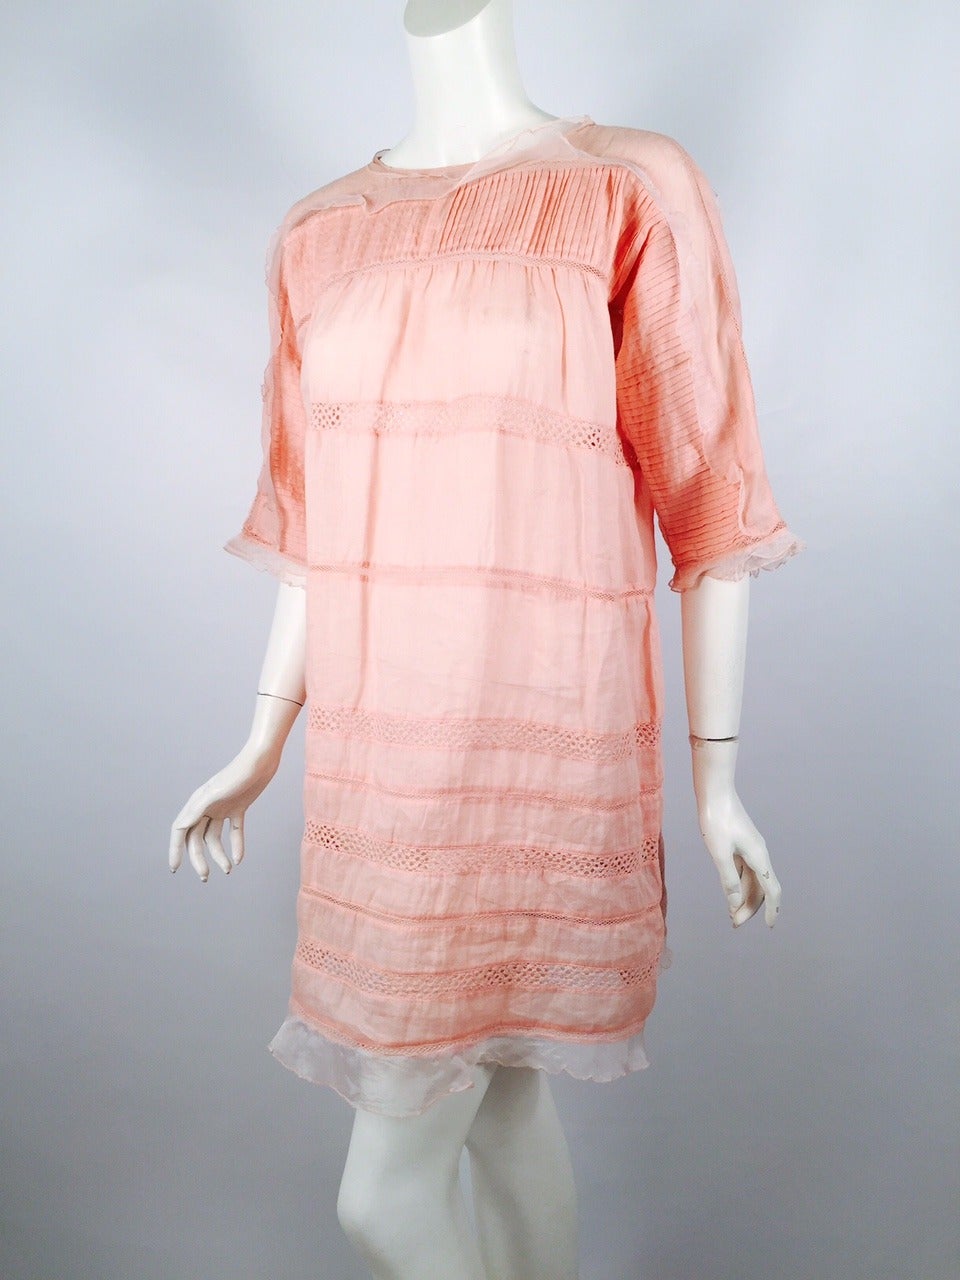 Isabel Marant Peach Ramie and Silk Dress is not only ultra-feminine, light, and ethereal.  This sublime and sophisticated confection is also the ultimate in Summer chic!  Features include round neckline, elbow length sleeves and generous silhouette.